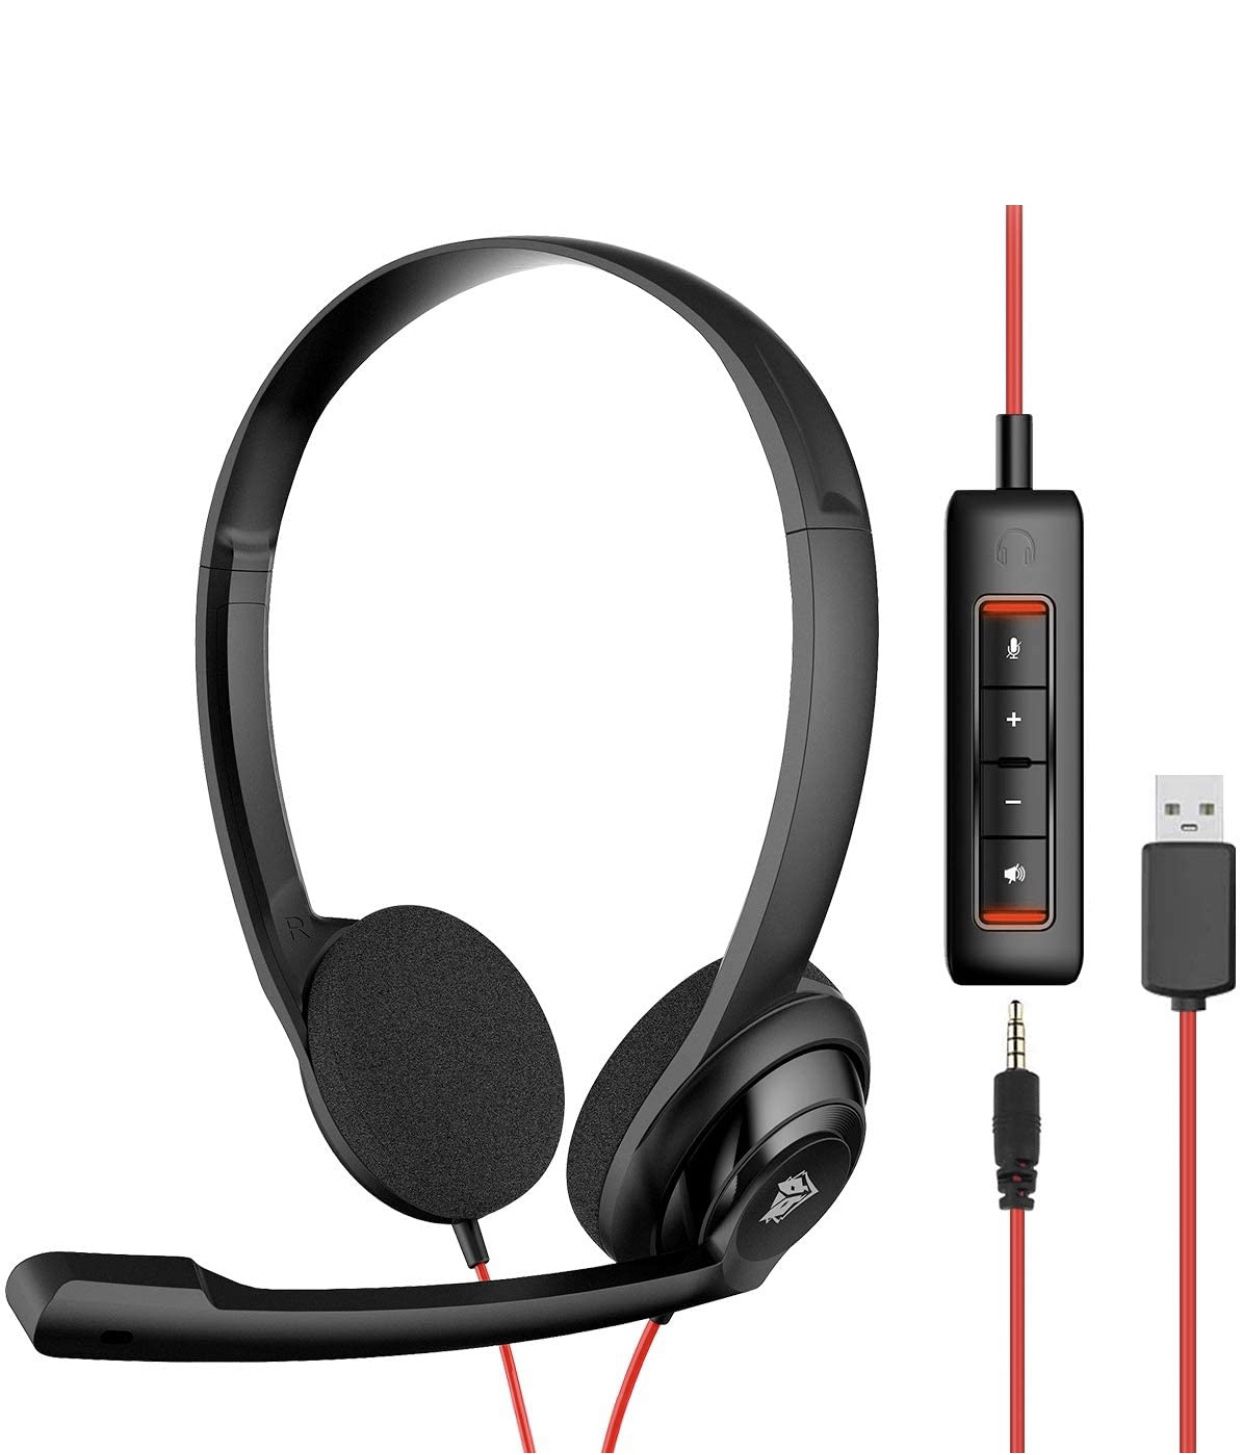 NUBWO USB Headset with Mic for Laptop, Noise Canceling Computer Headphones with Mic, Wired In-Ear Headset for Office Call Center for Boom Skype Webina